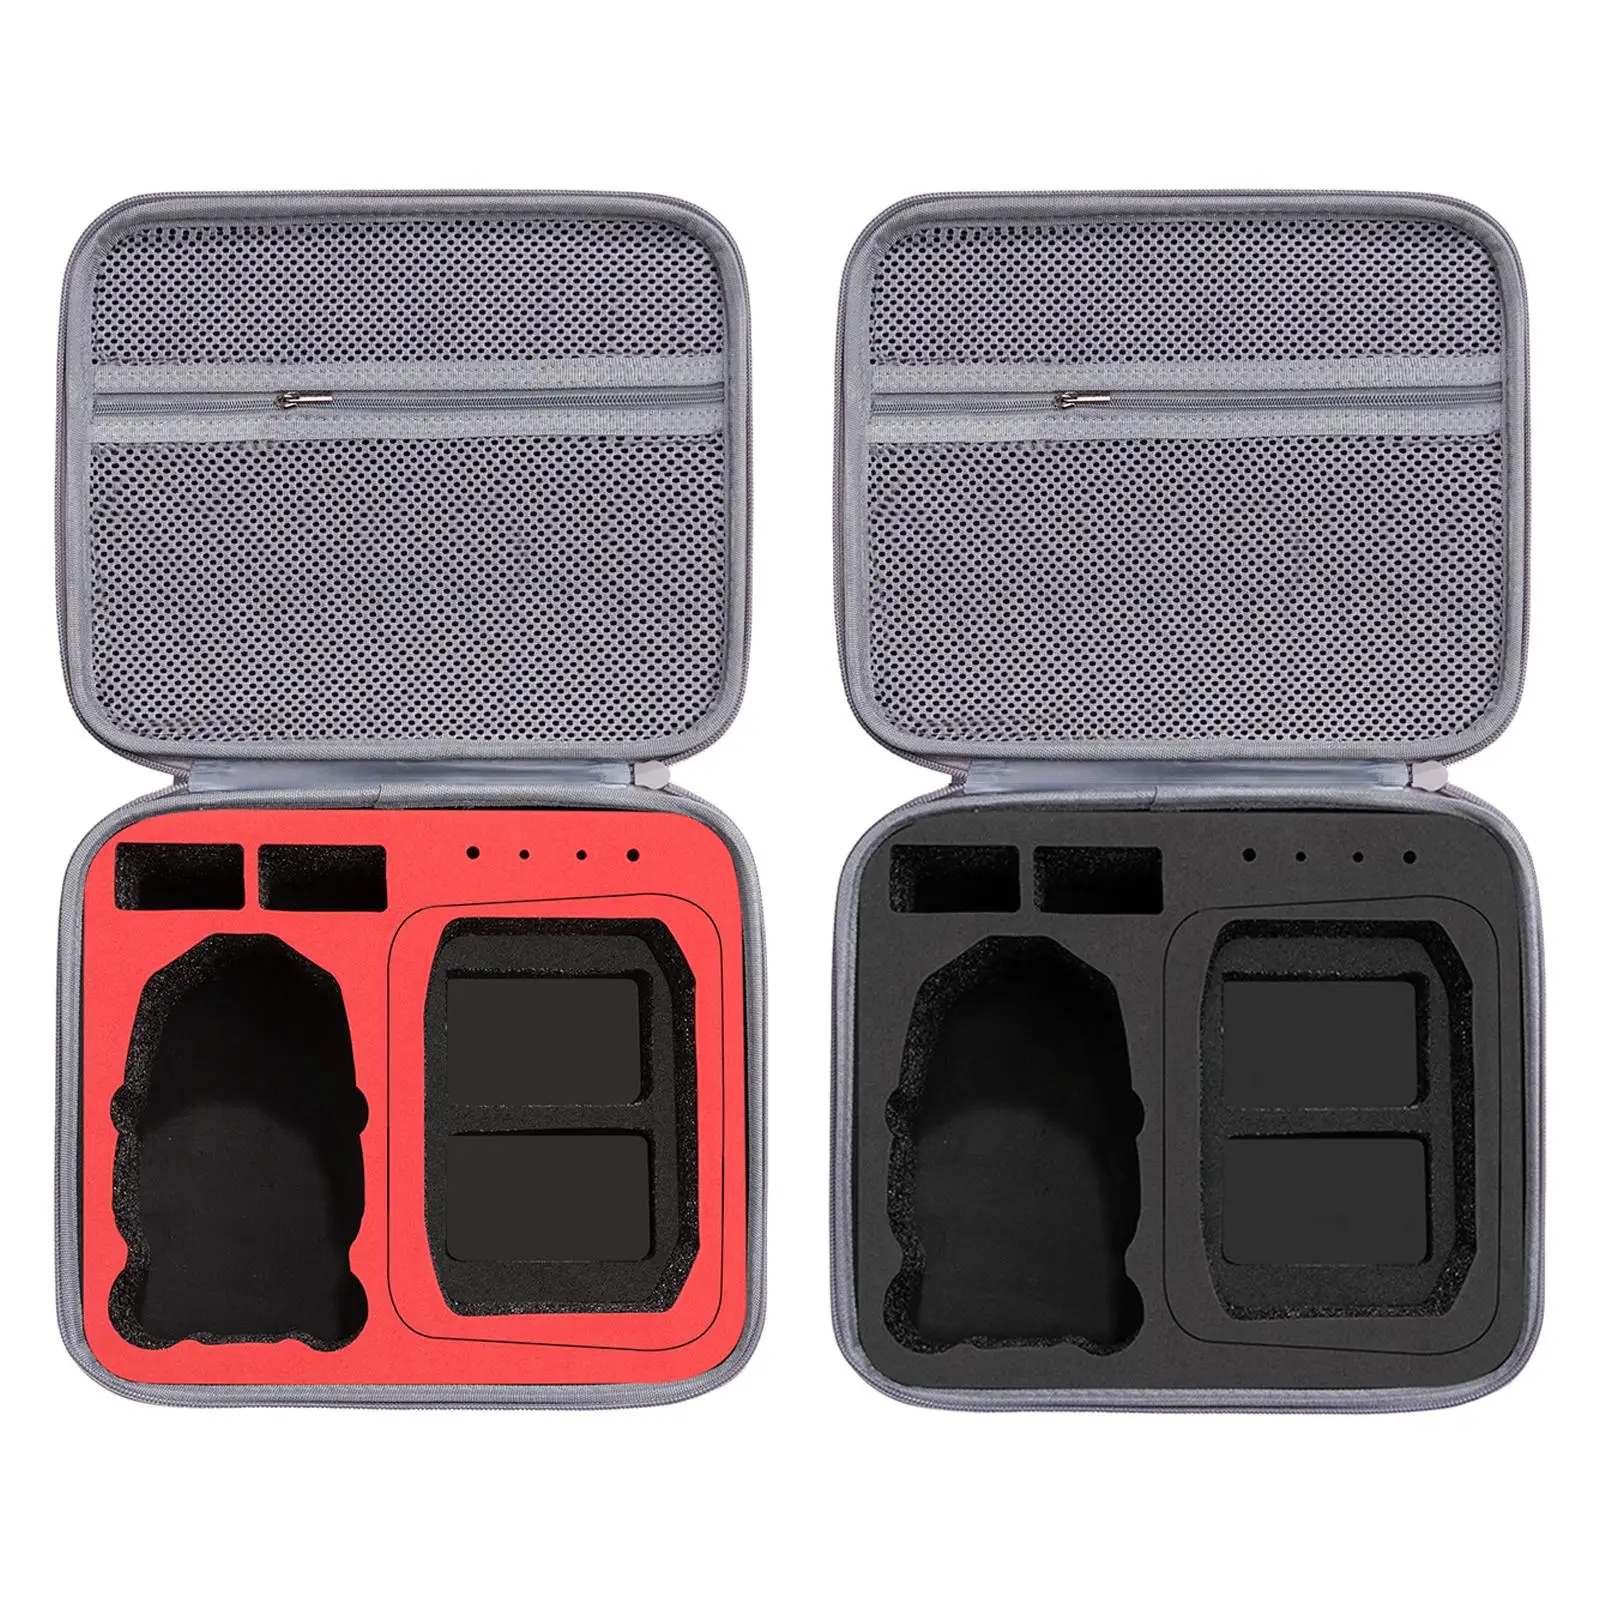 Travel Drone Carrying Case Travel Case Remote Control Bag Remote Controller Case for DJI Mini 3 Pro Drone RC Drone Parts